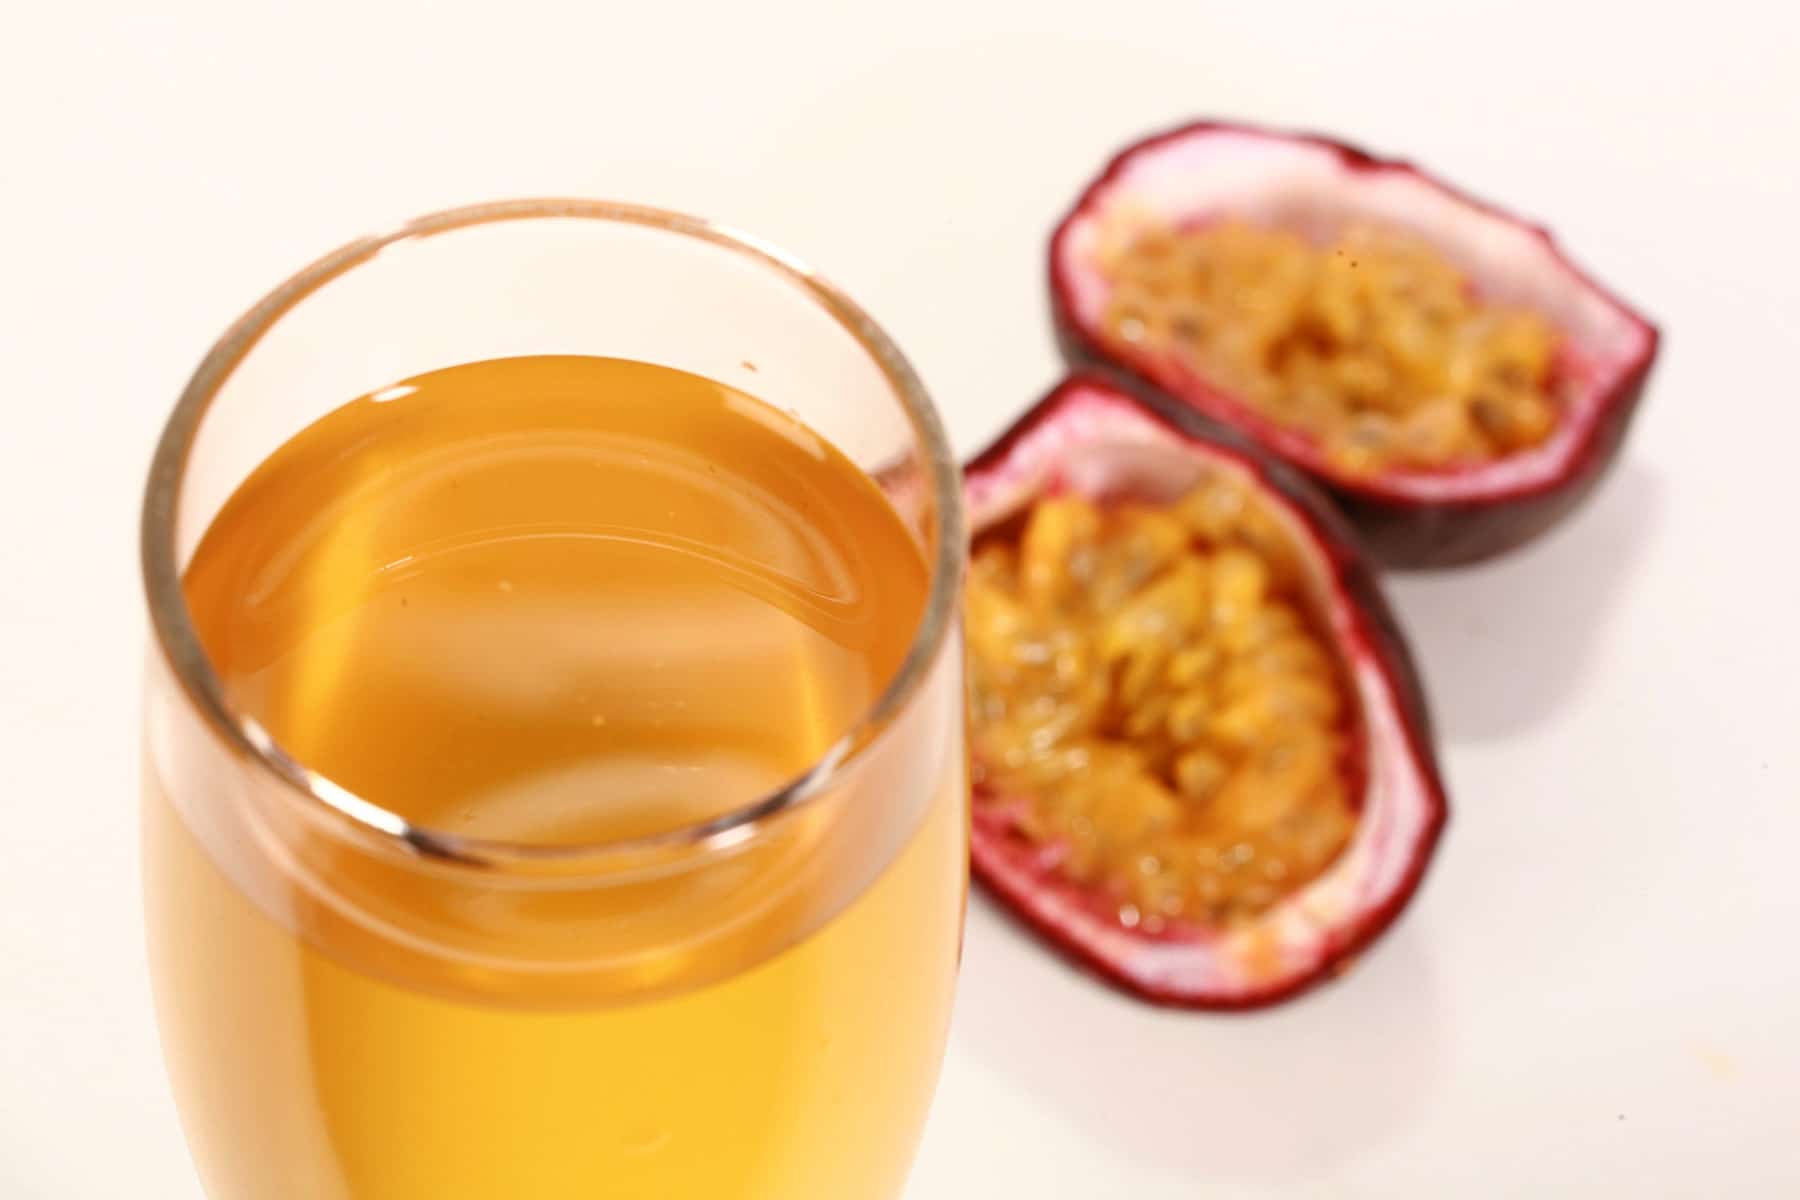 A flute of golden yellow passionfruit wine, next to a halved passionfruit.